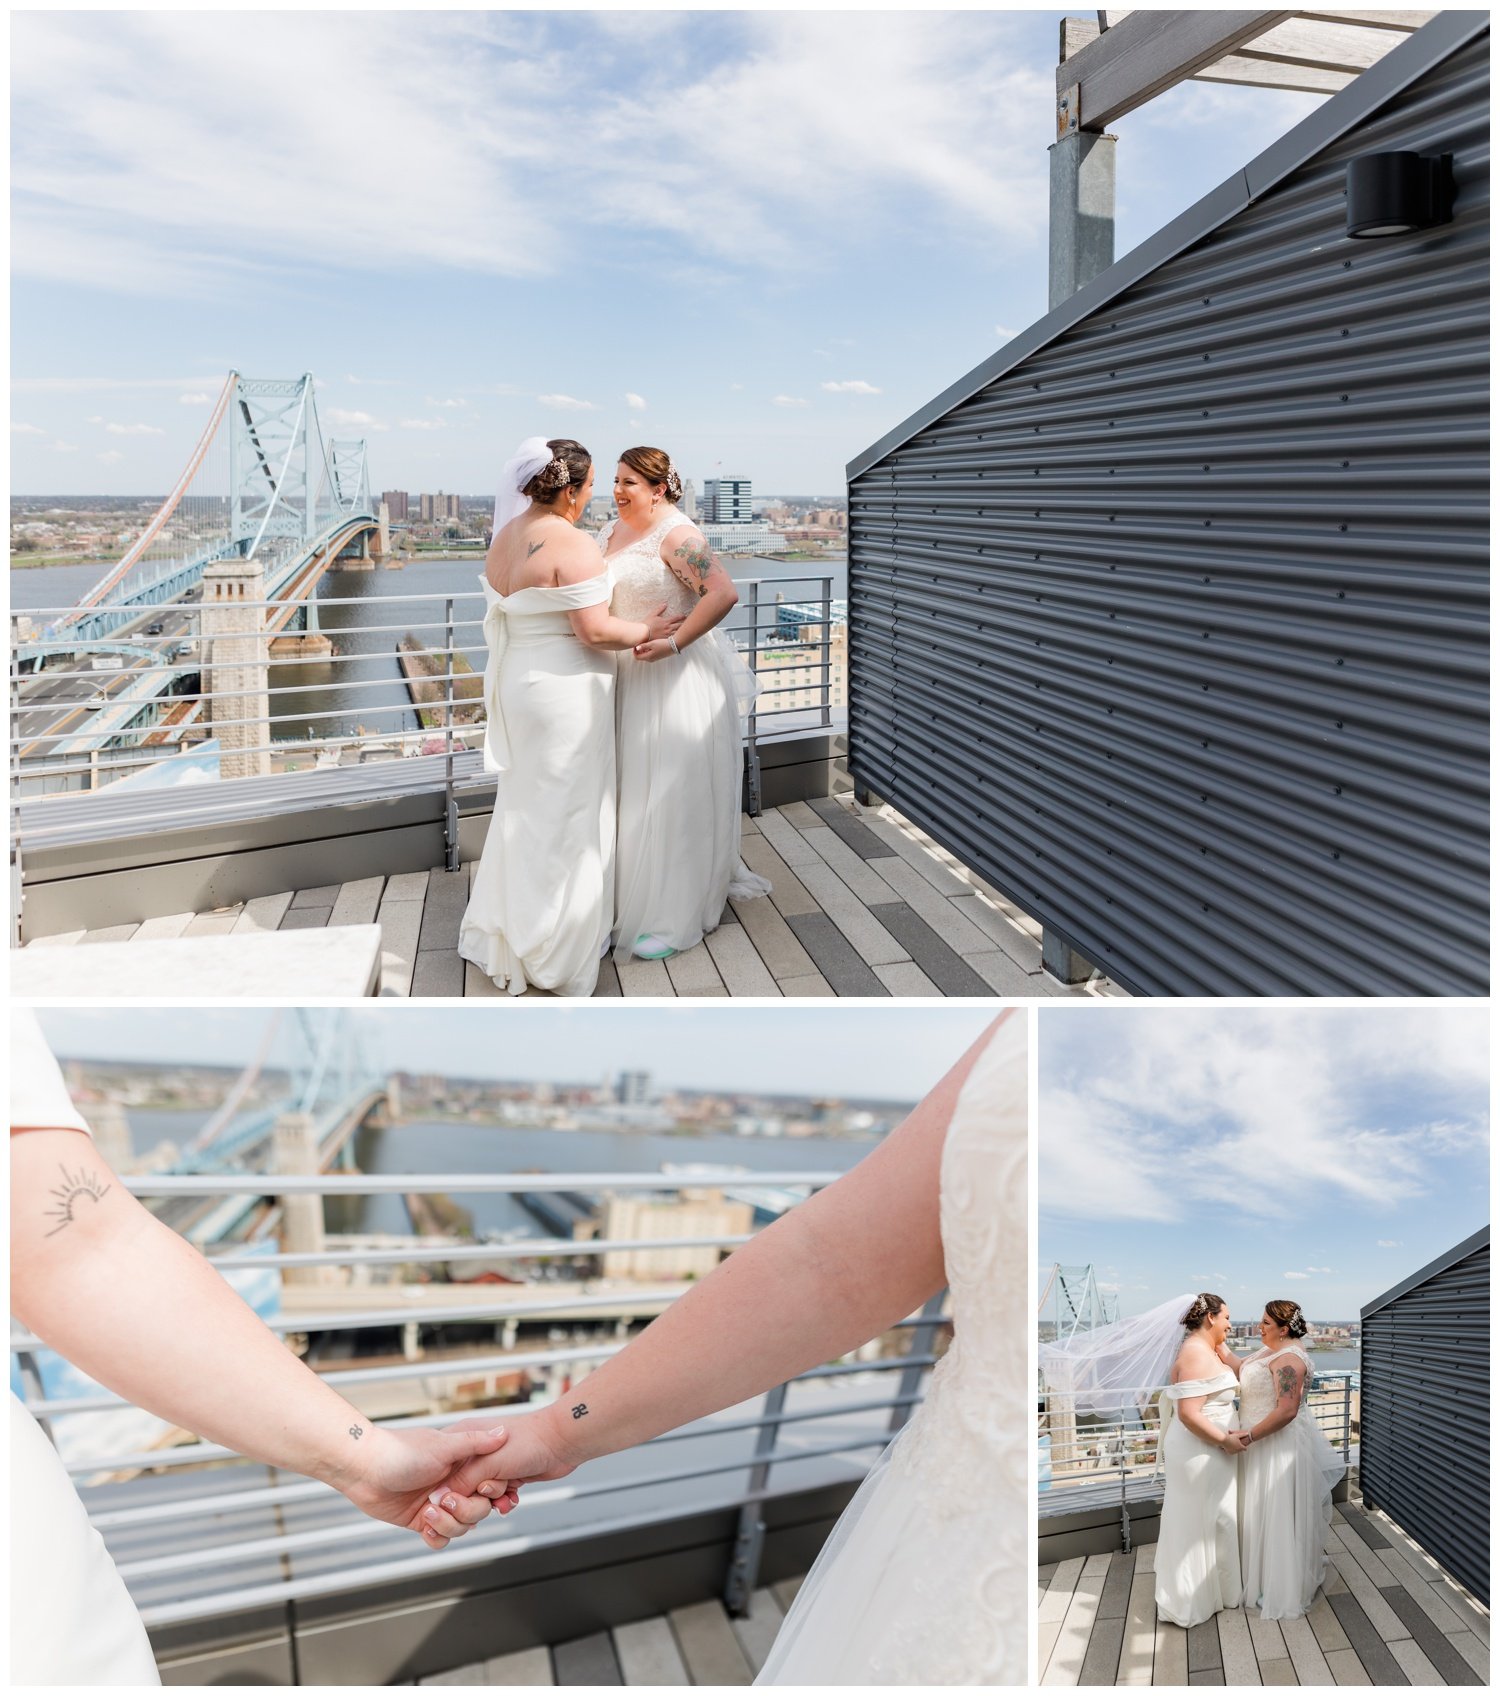 Race-Street-Pier-and-Yards-Brewing-Compnay-Philly-LGBT-Wedding-10.jpg